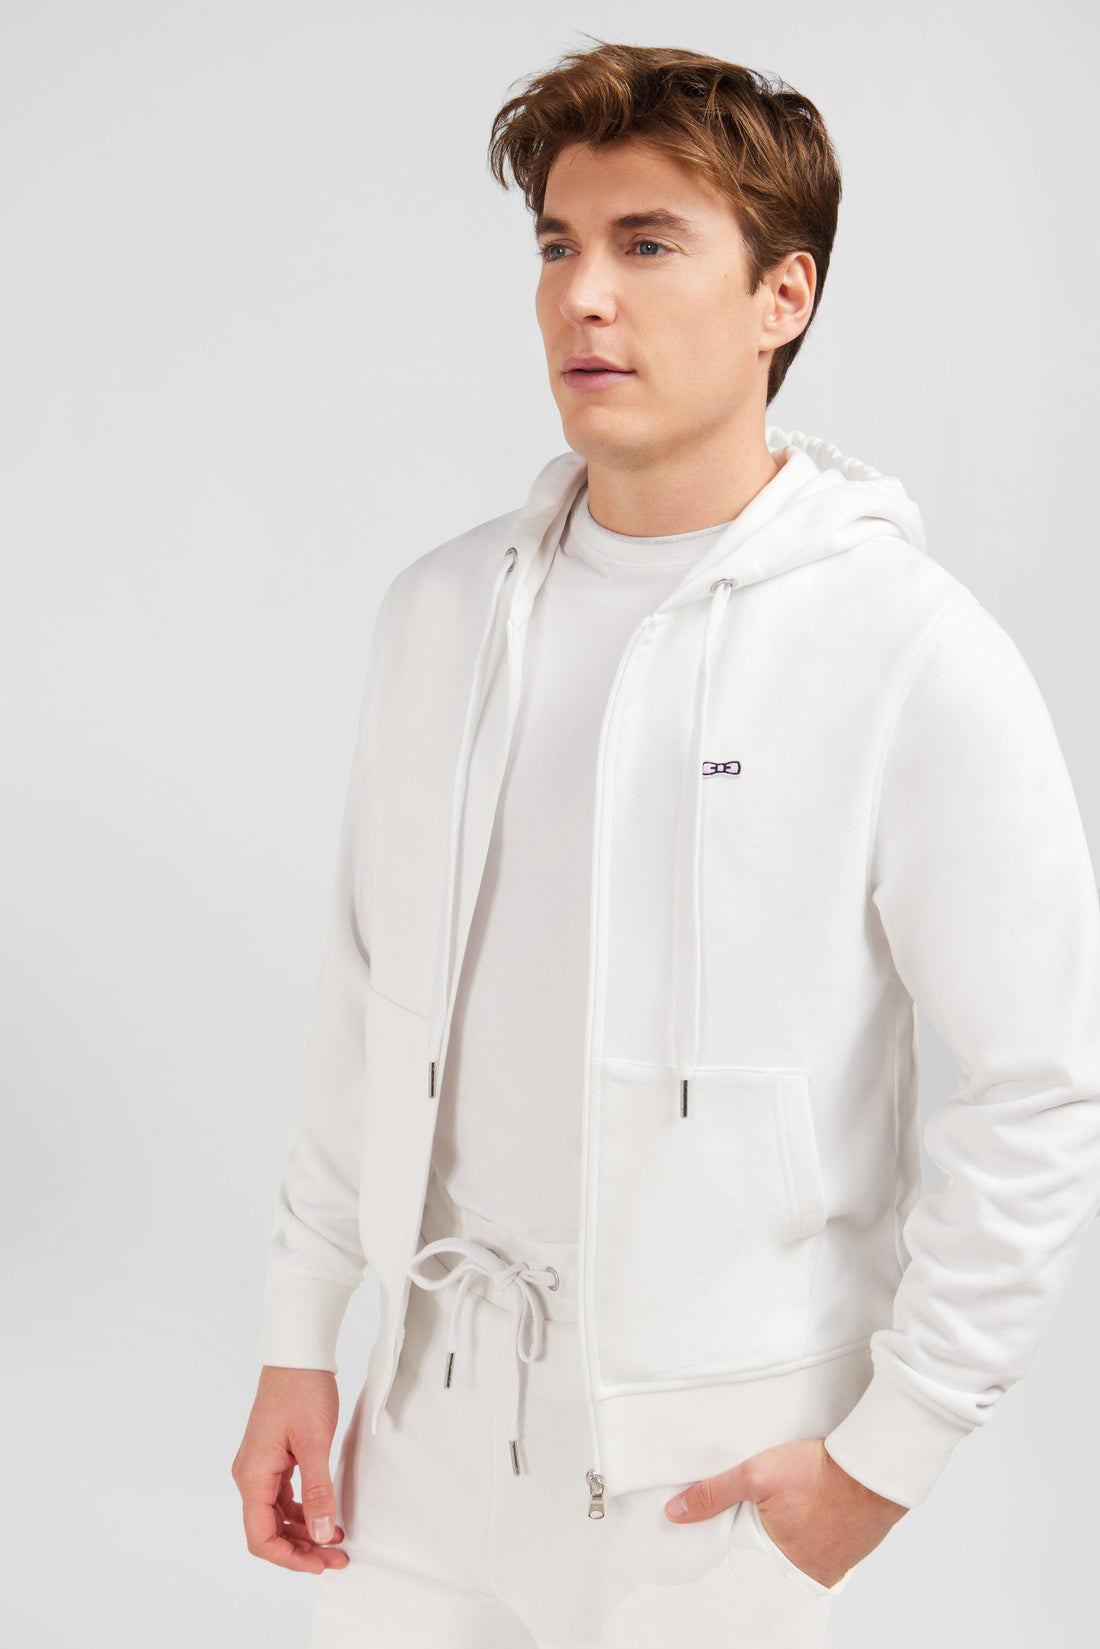 White Fleece Zipped Hoodie With Bow Tie Embroidery_E24MAISW0050_BC_02